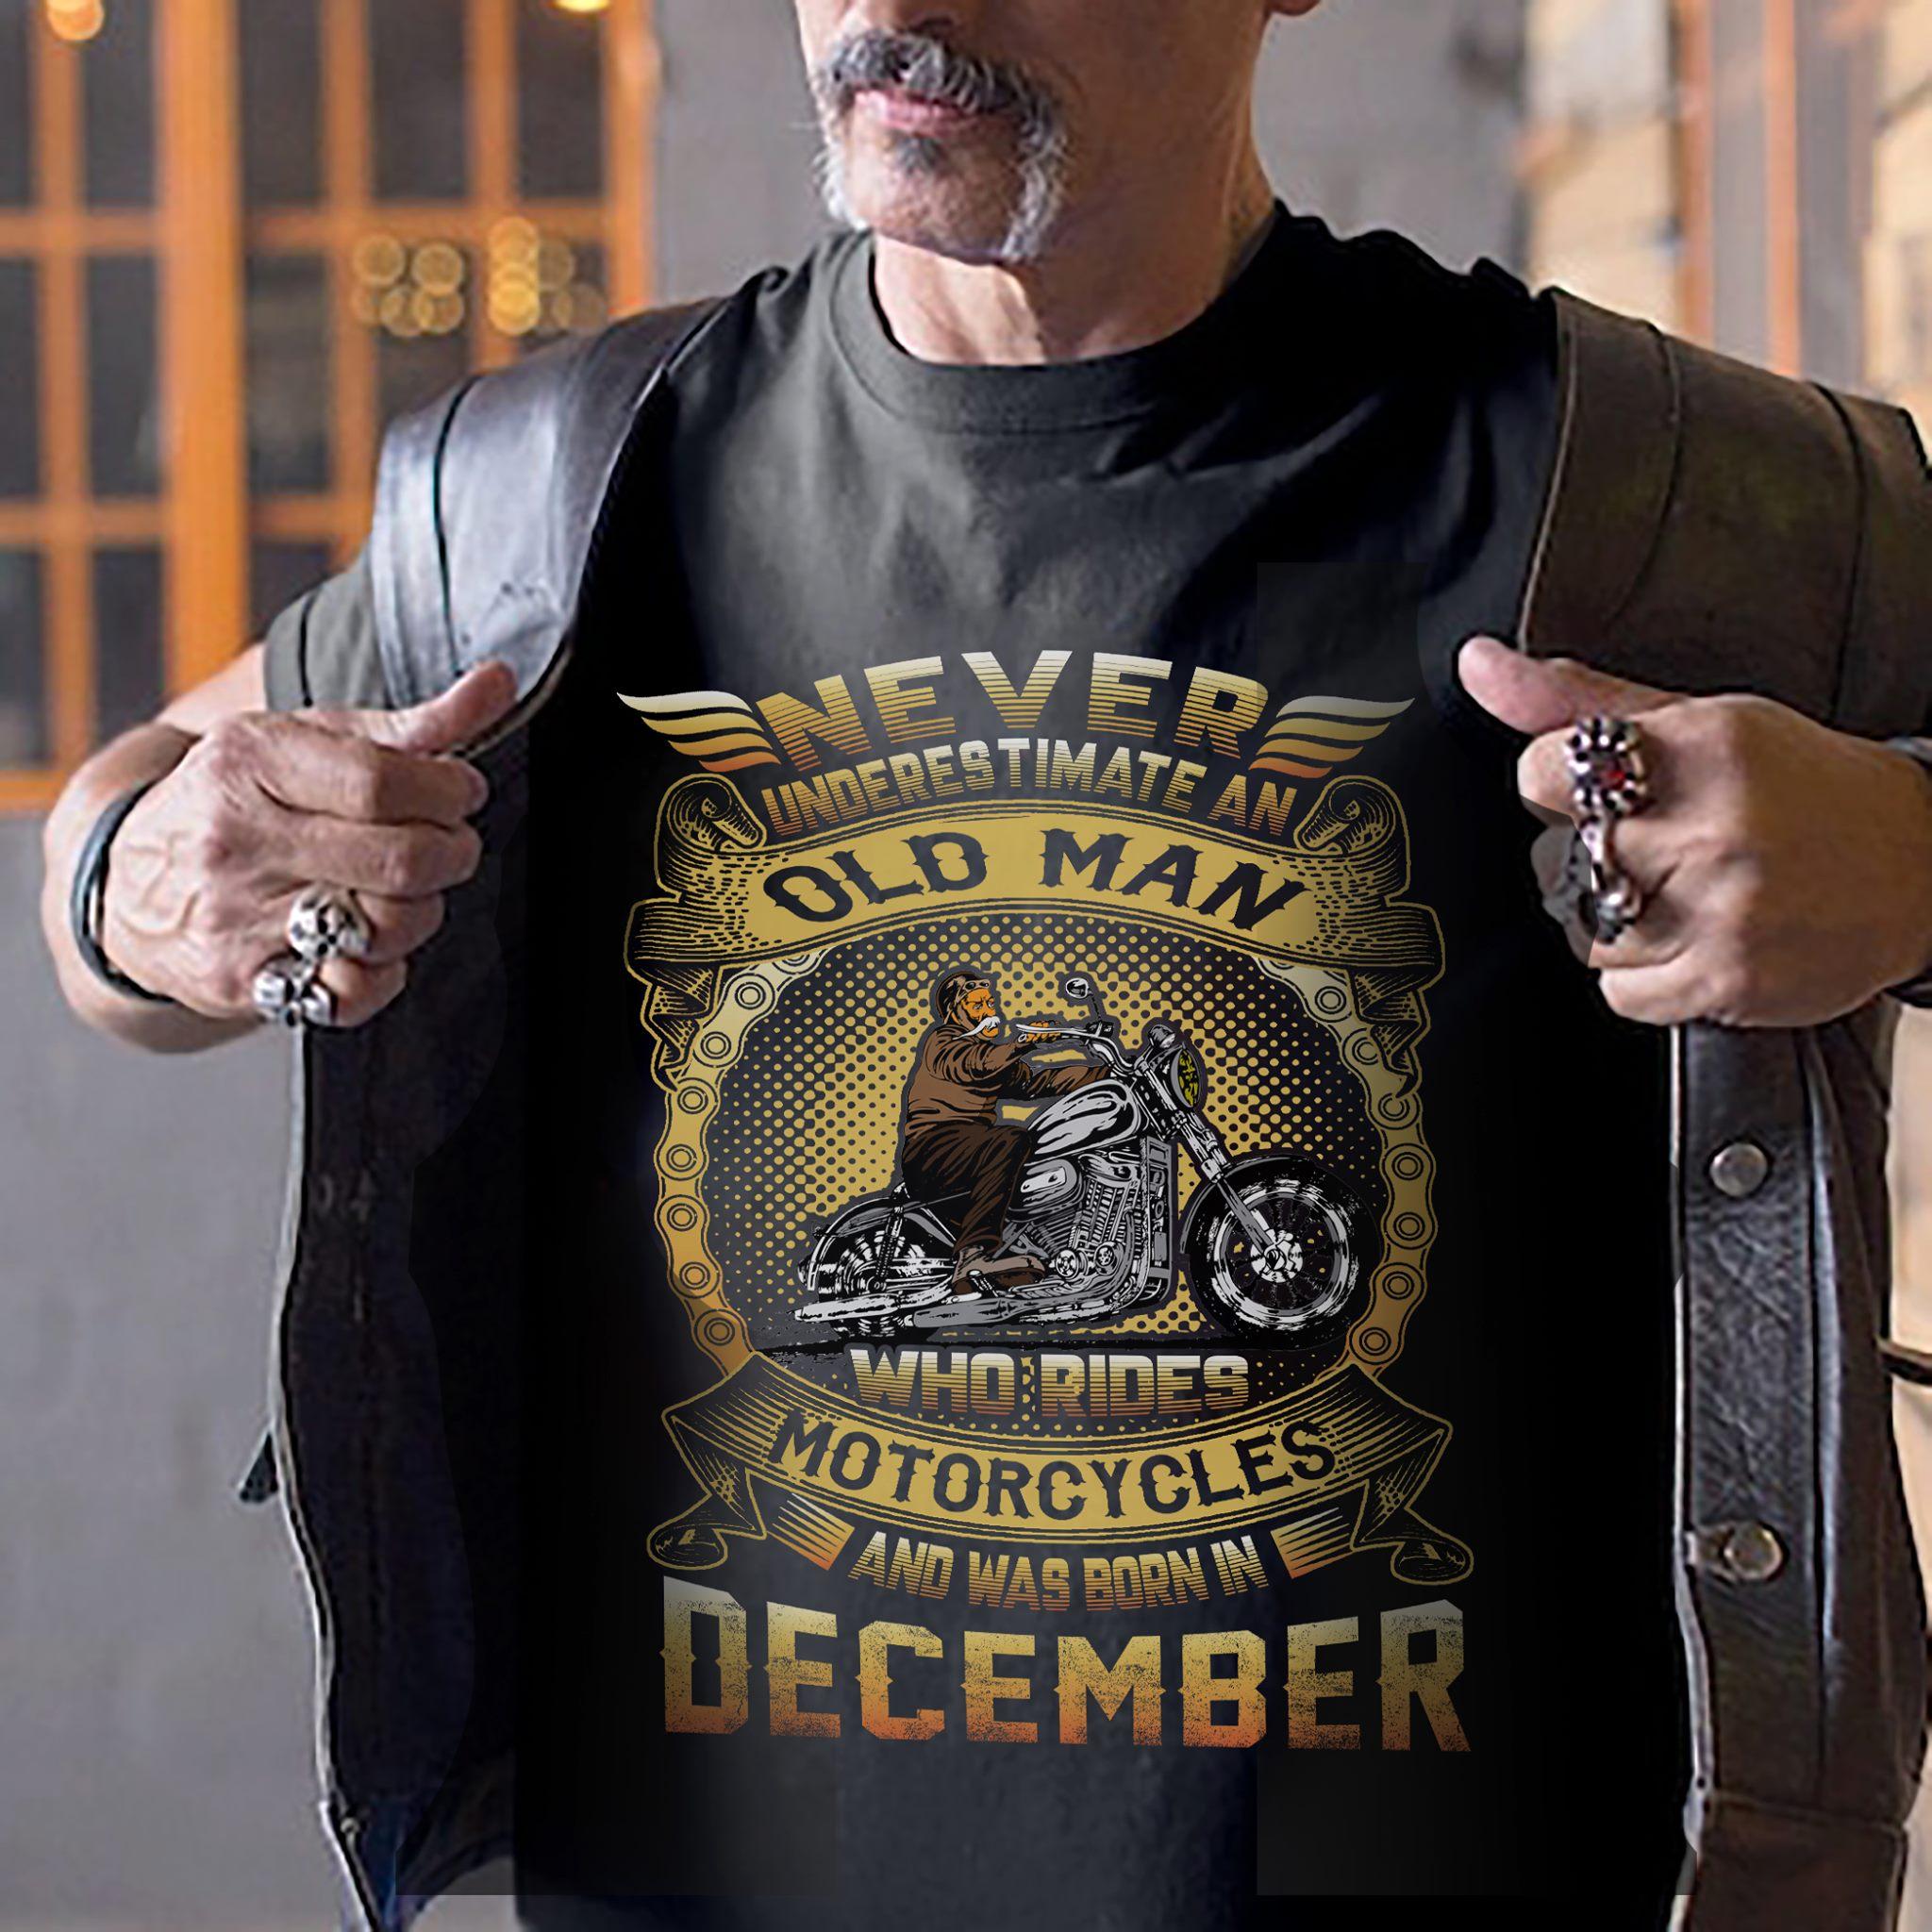 December Birthday Motorcycle Old Man - Never underestimate an old man who rides motorcycles and was born in december